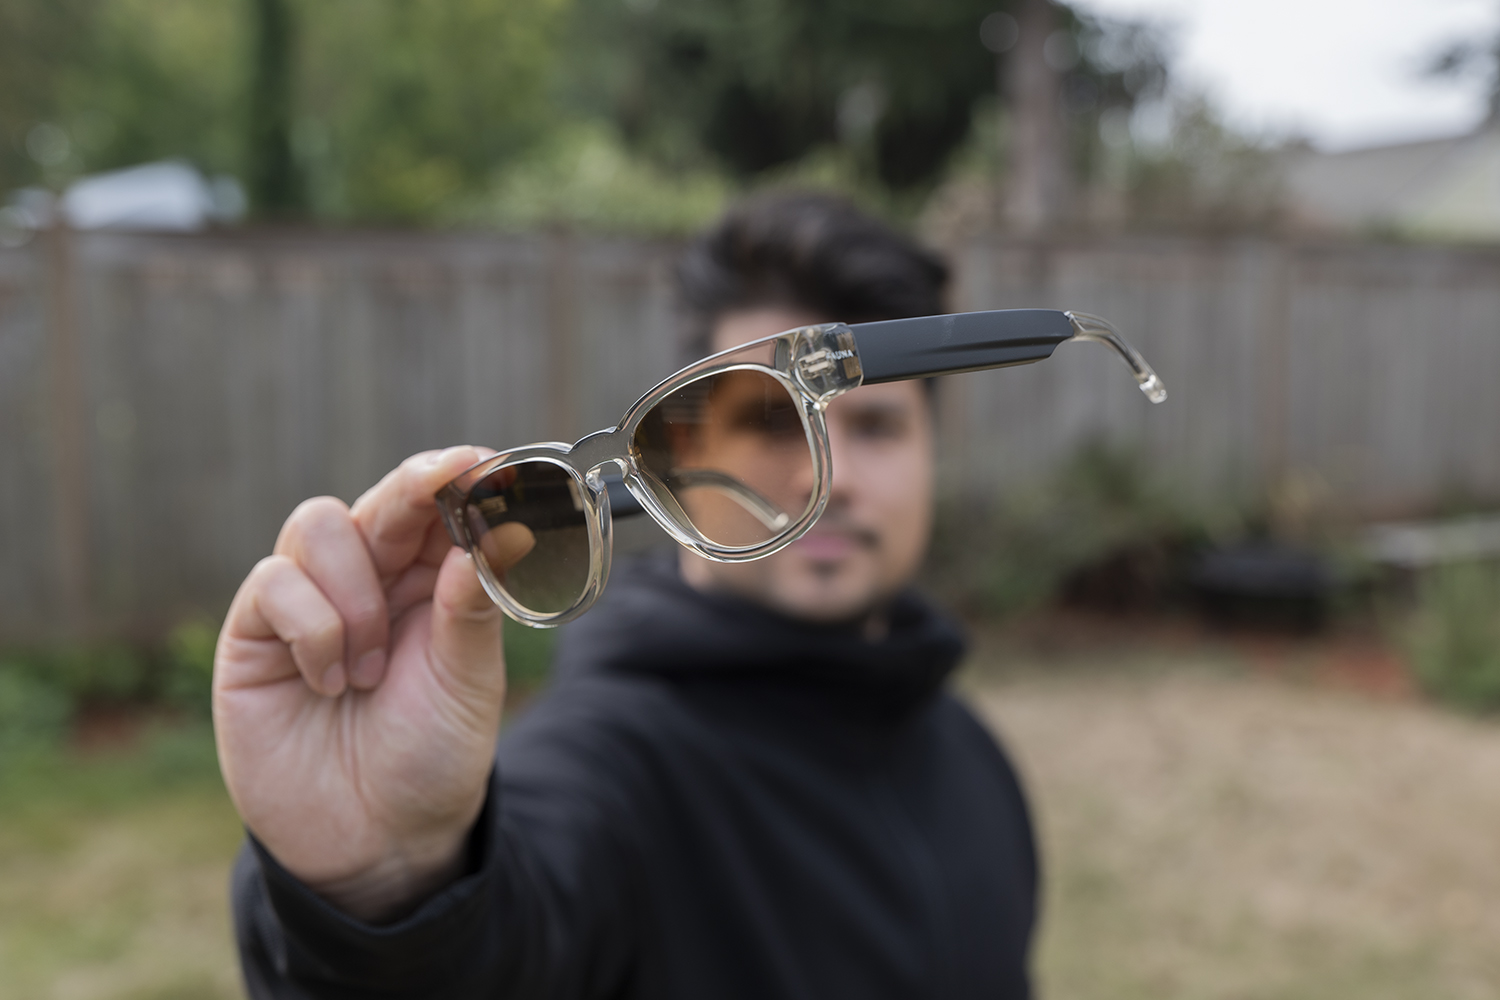 Fauna Audio Glasses Review: Don't Sound Great, Hard to Hate